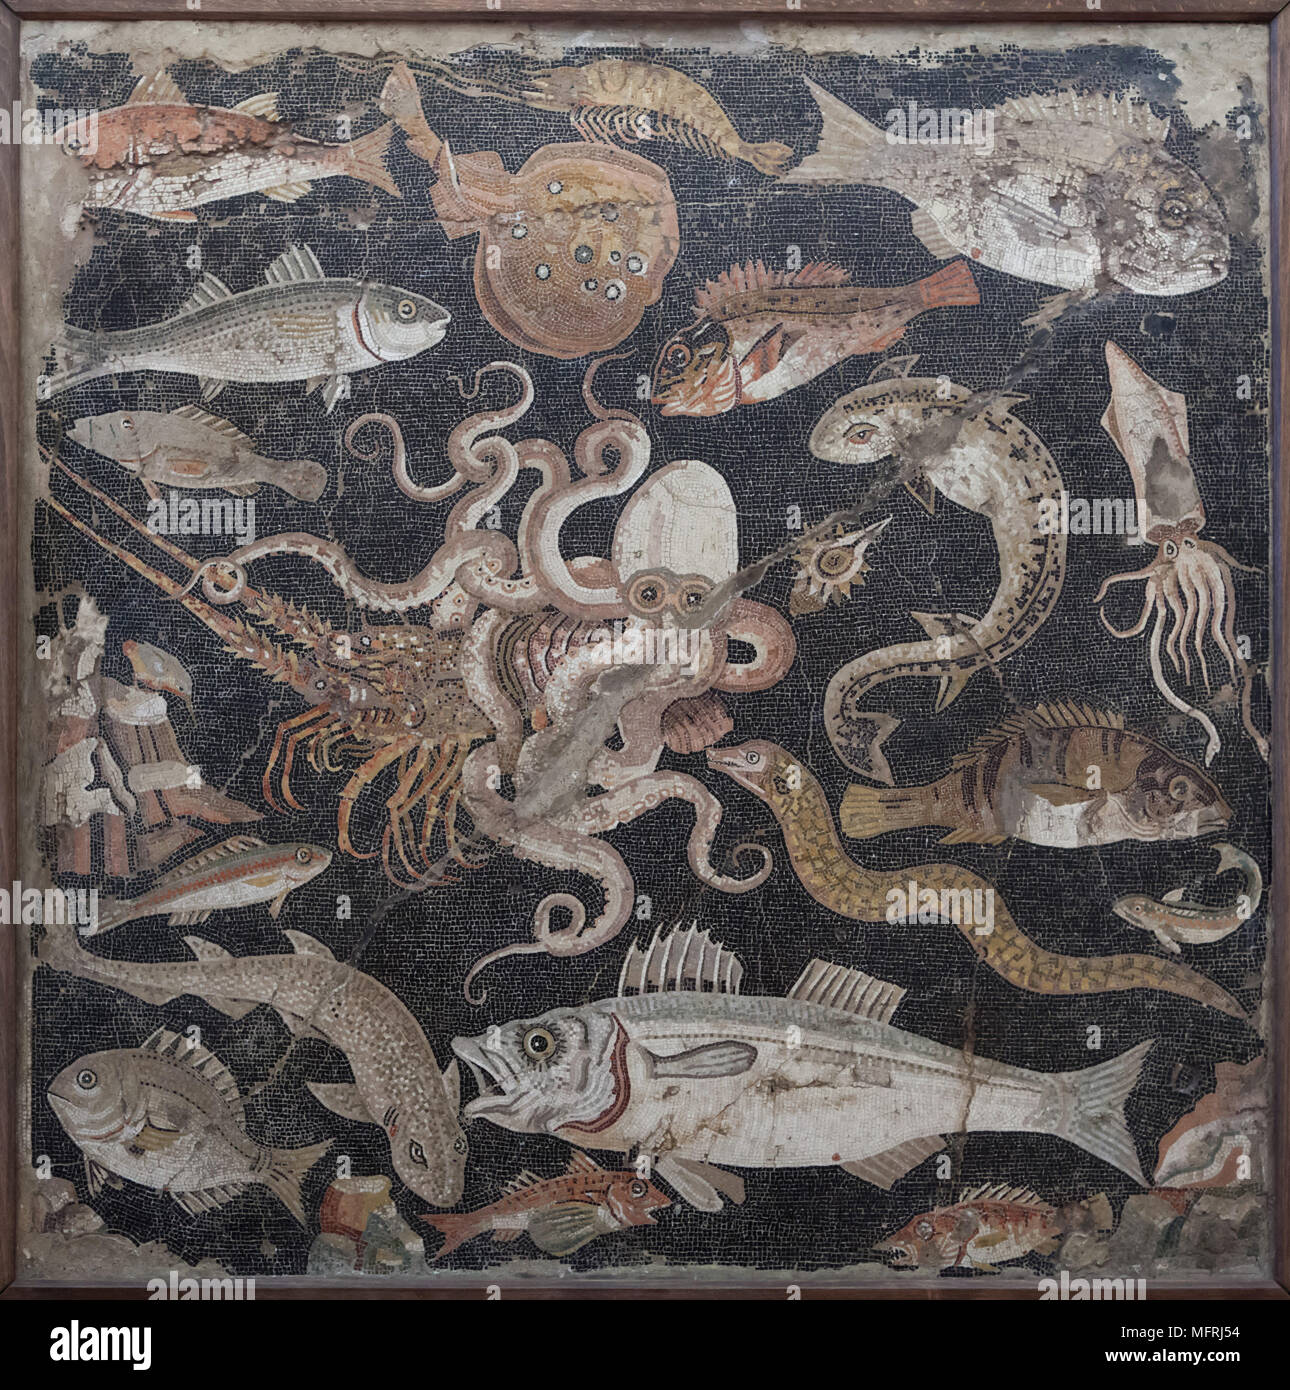 Marine life (Fish catalogue) depicted in the Roman mosaic from the Casa di Lucius Aelius Magnus (House of Lucius Aelius Magnus) in Pompeii, now on display in the National Archaeological Museum (Museo Archeologico Nazionale di Napoli) in Naples, Campania, Italy. Common octopus (Octopus vulgaris), Mediterranean lobster (Palinurus elephas), European conger (Conger conger) and European squid (Loligo vulgaris) are depicted in the mosaic. Stock Photo